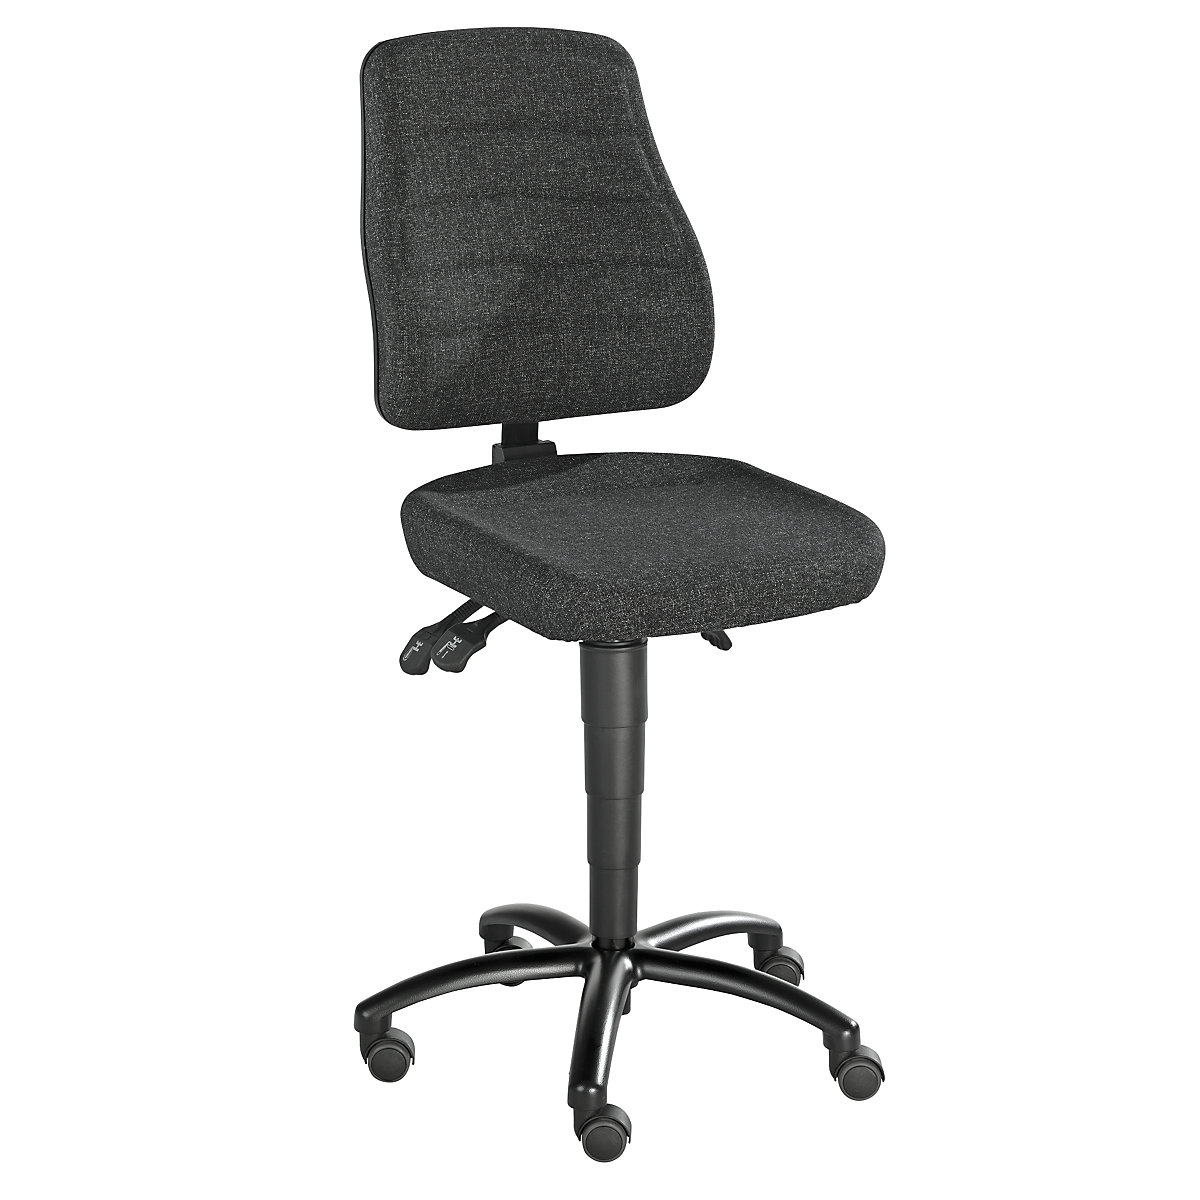 Industrial swivel chair – eurokraft pro, fabric cover, with castors-5